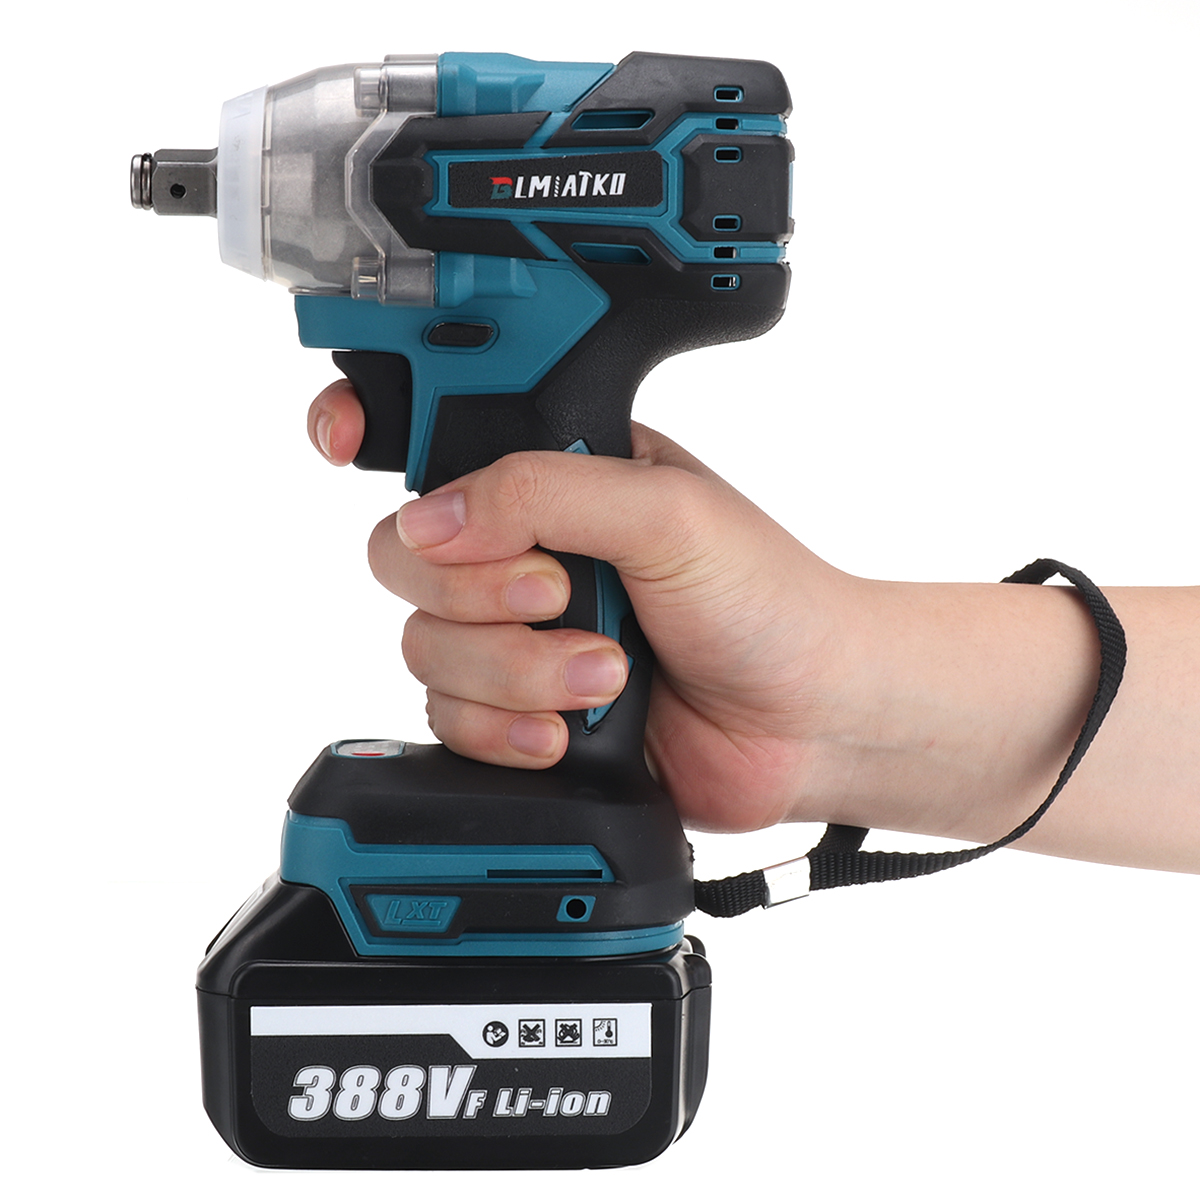 BLMIATKO-388VF-520Nm-Electric-Brushless-Impact-Wrench-Rechargeable-Woodworking-Maintenance-Tool-with-1919212-11